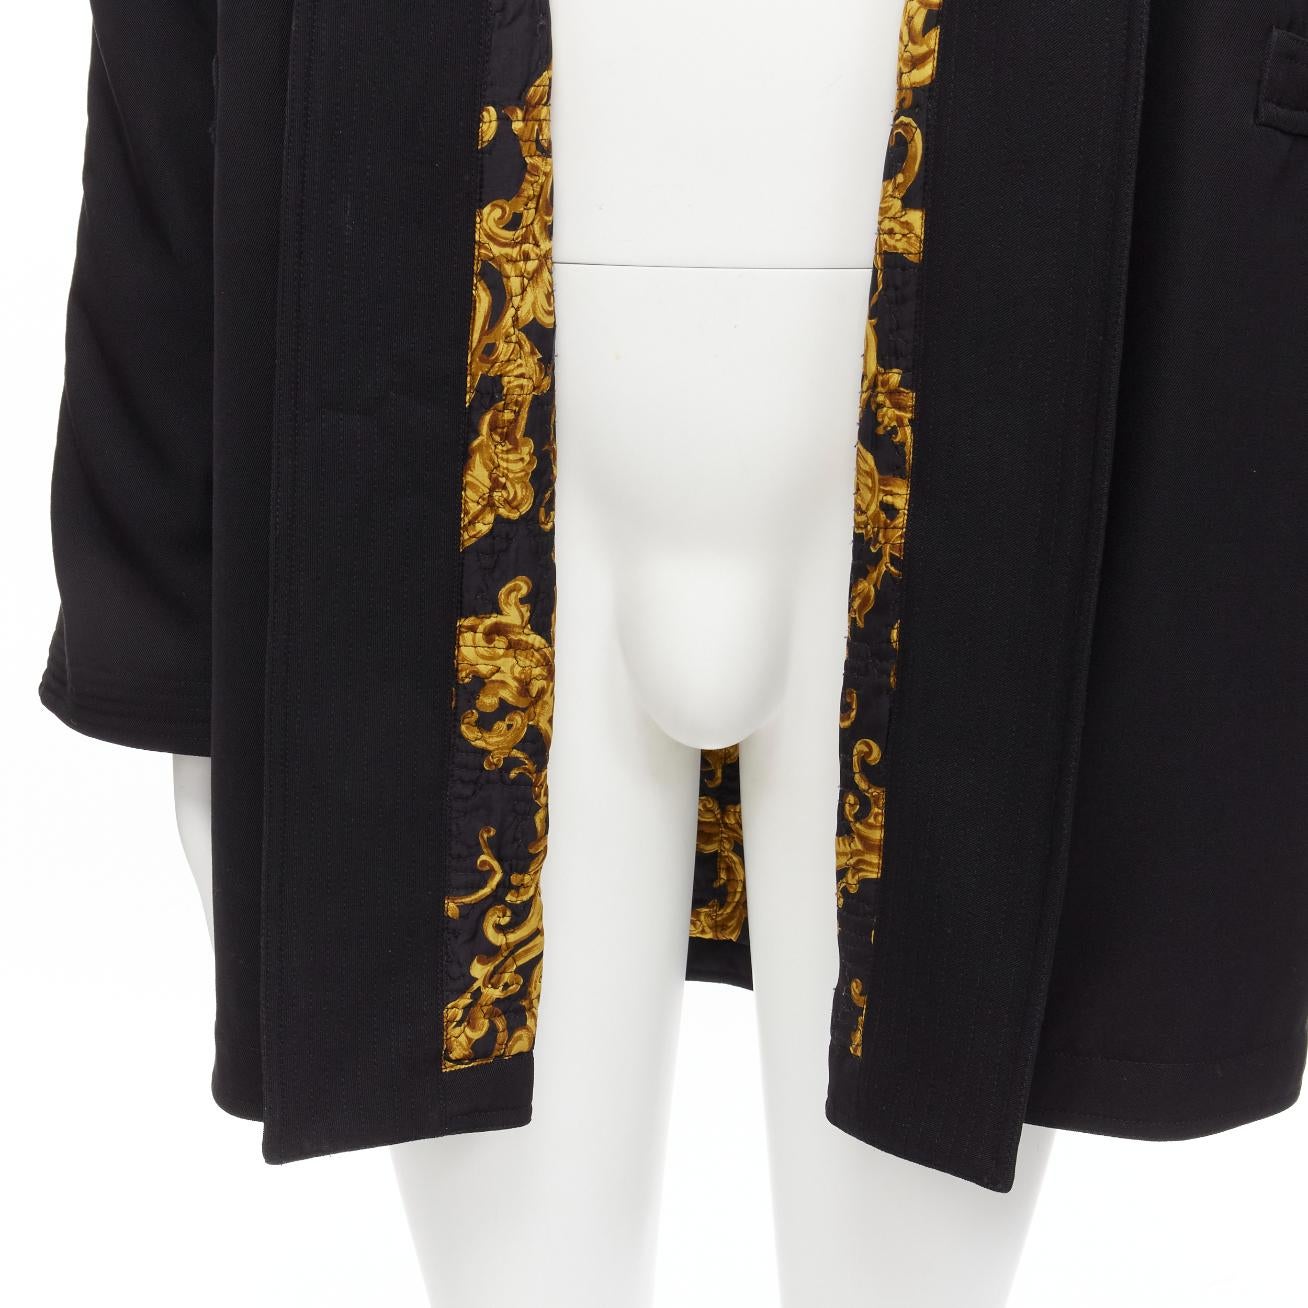 GIANNI VERSACE Vintage 100% wool black gold barocco lined robe coat jacket
Reference: TGAS/D00356
Brand: Versace
Designer: Gianni Versace
Material: Wool
Color: Black, Gold
Pattern: Solid
Lining: Gold Fabric
Extra Details: No closure to the jacket.